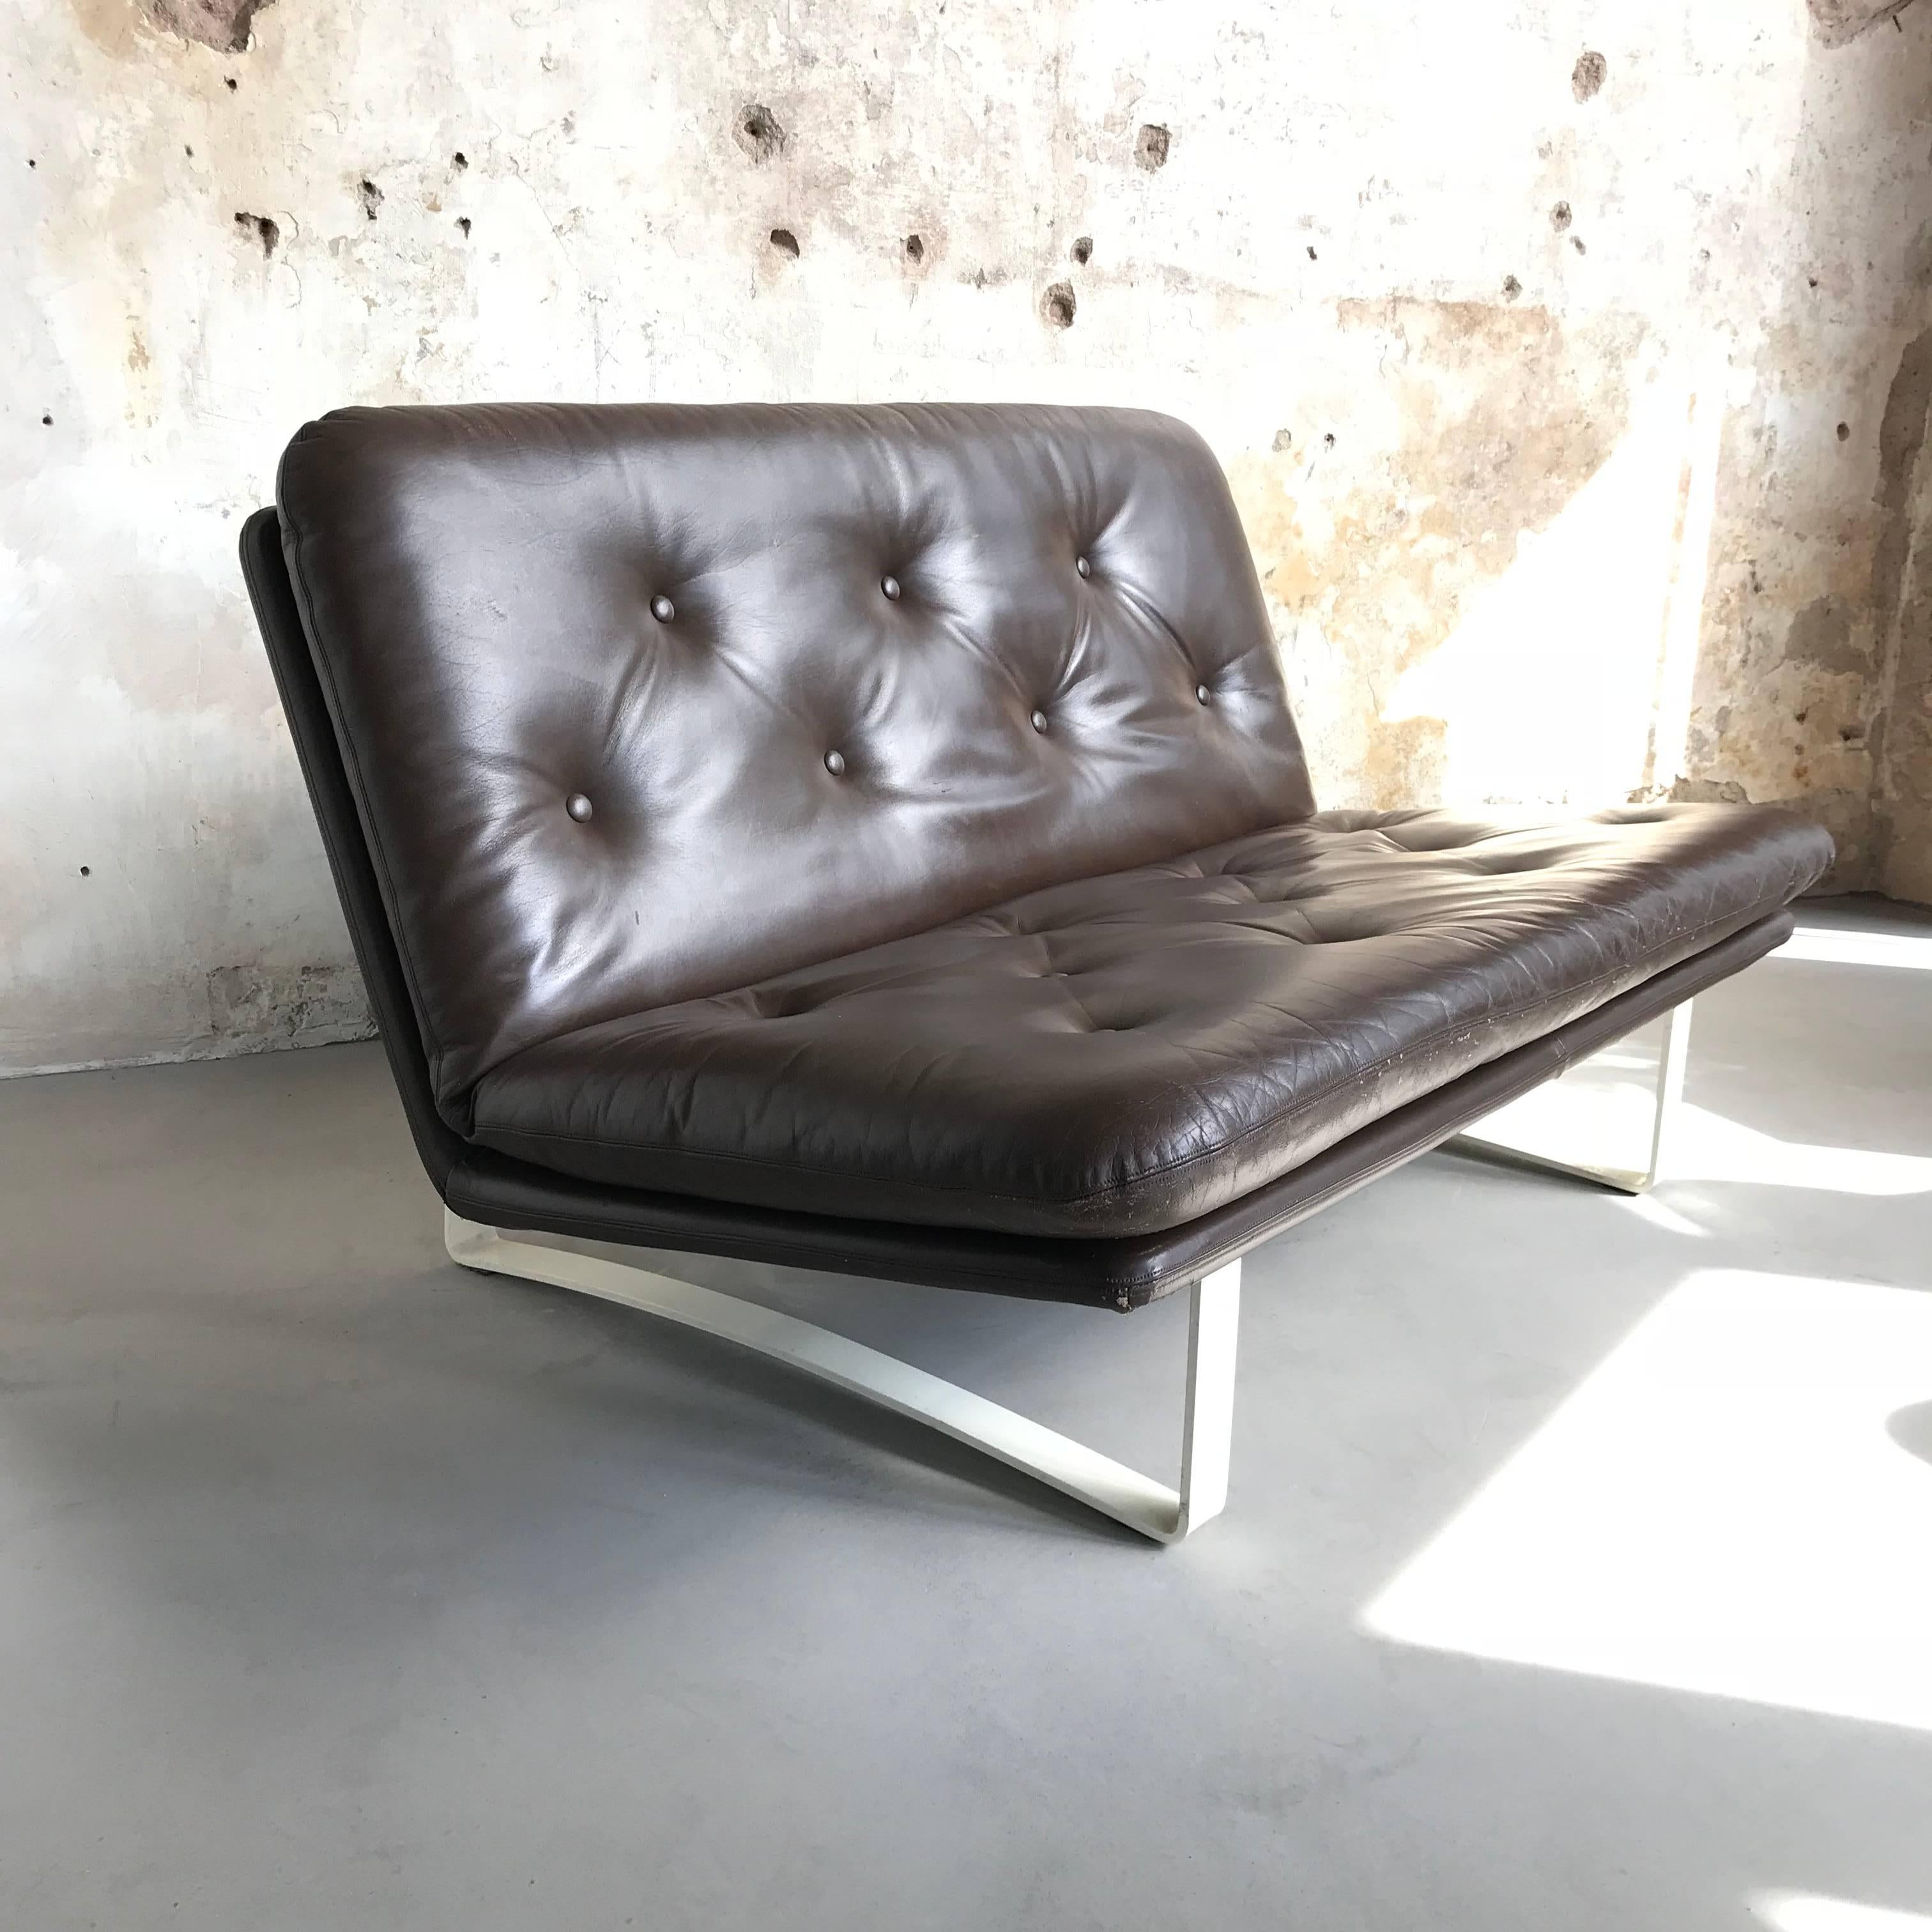 Mid-Century Modern Vintage Artifort C684 Sofa by Kho Liang Ie 1960s, Original Leather Upholstery